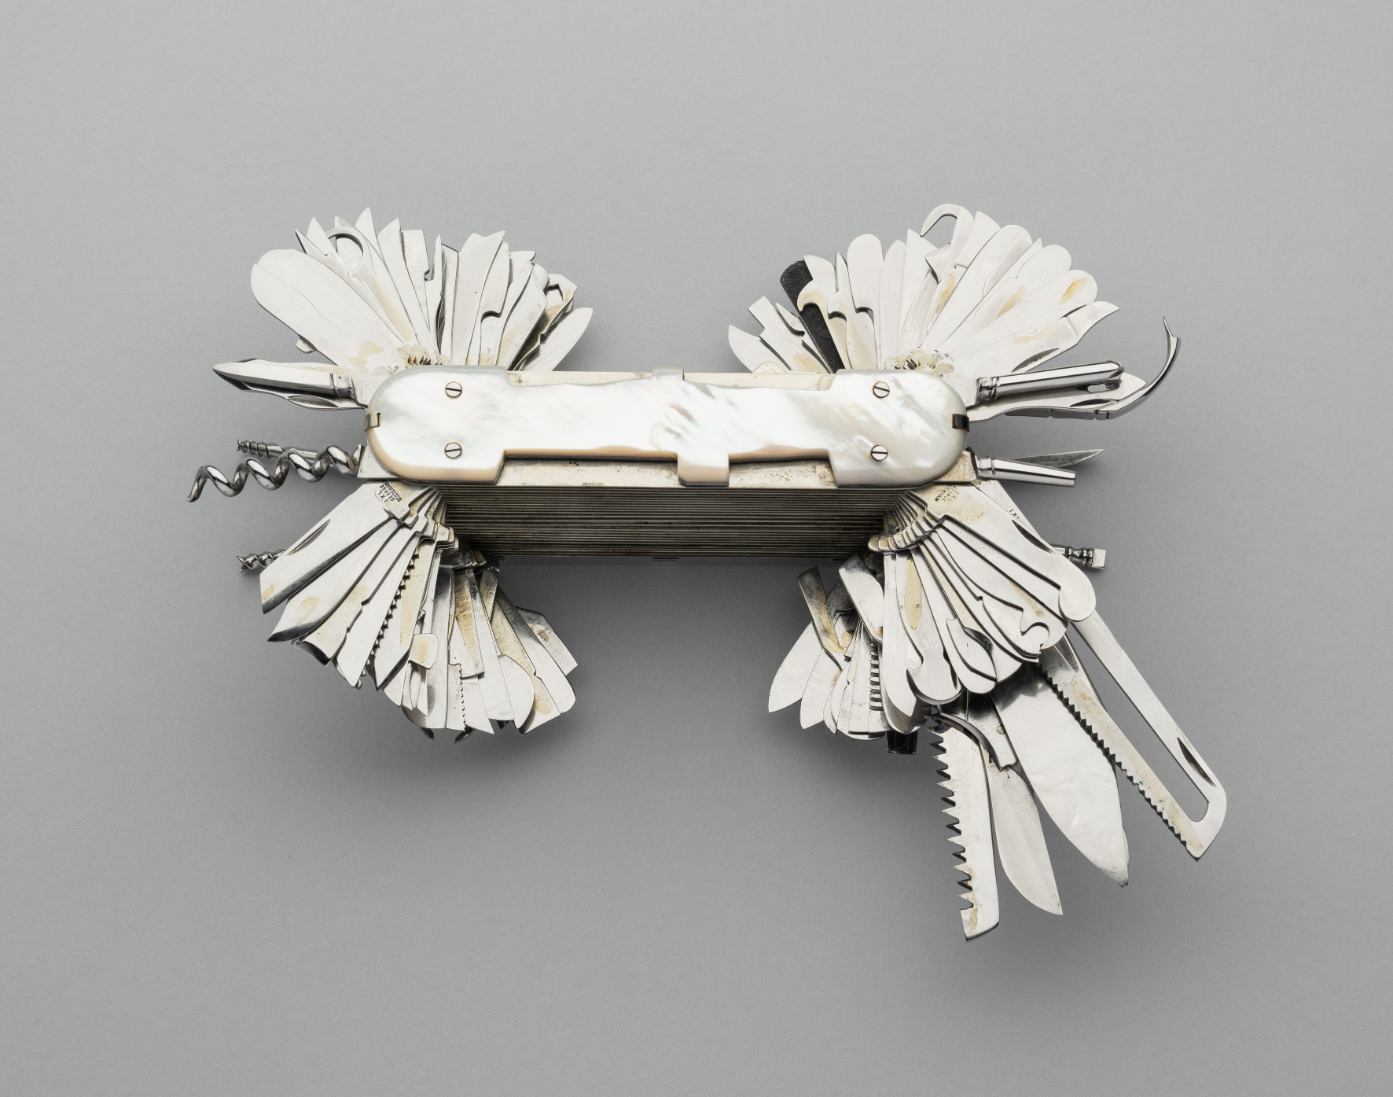 A FINE LARGE MULTI-BLADE PENKNIFE FOR EXHIBITION, GEORGE WOSTENHOLM I.XL, SHEFFIELD, 20TH CENTURY